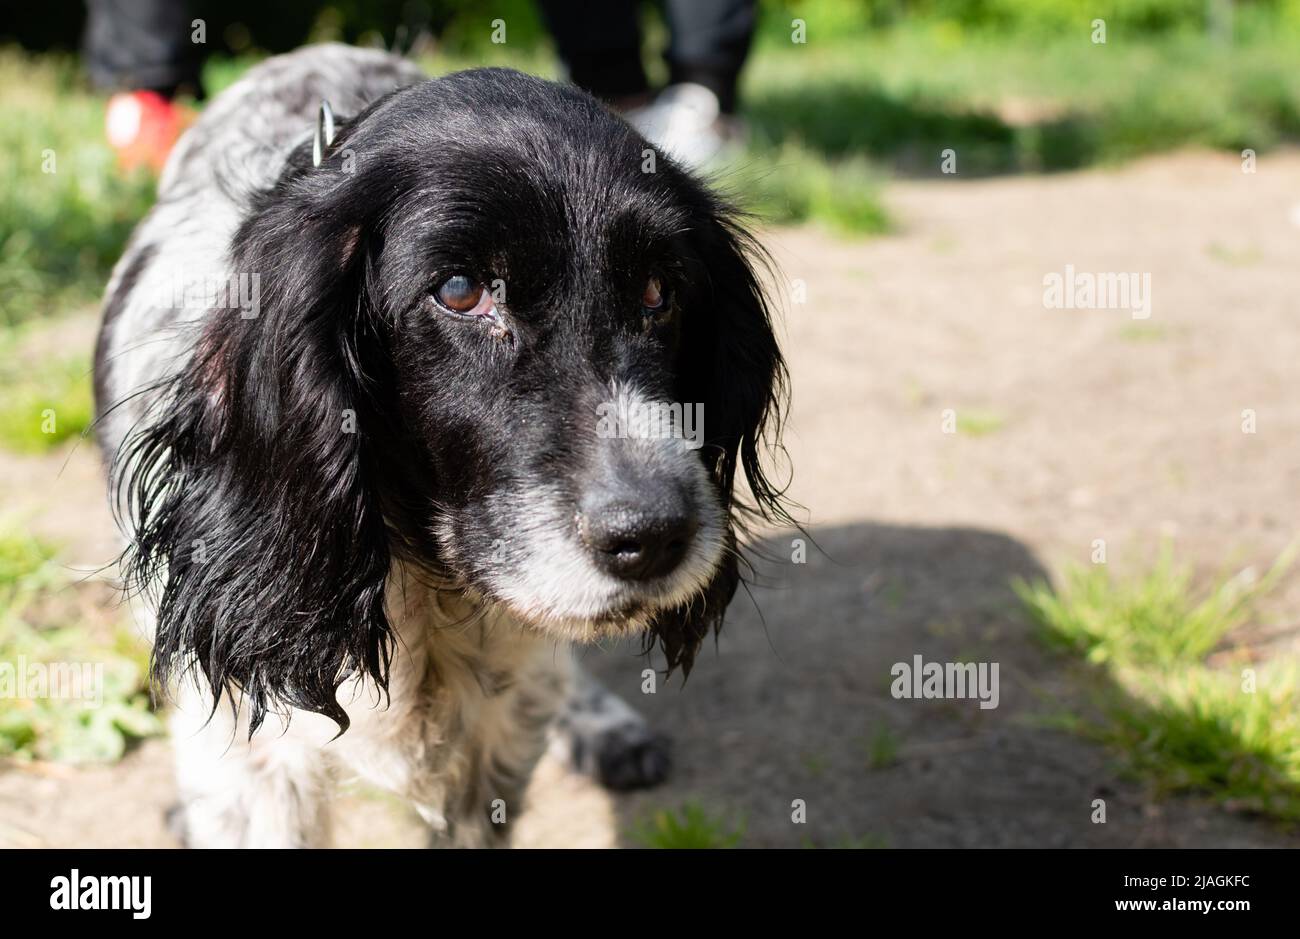 Portrait of old dog Spaniel close-up on blurry background in natural conditions Stock Photo